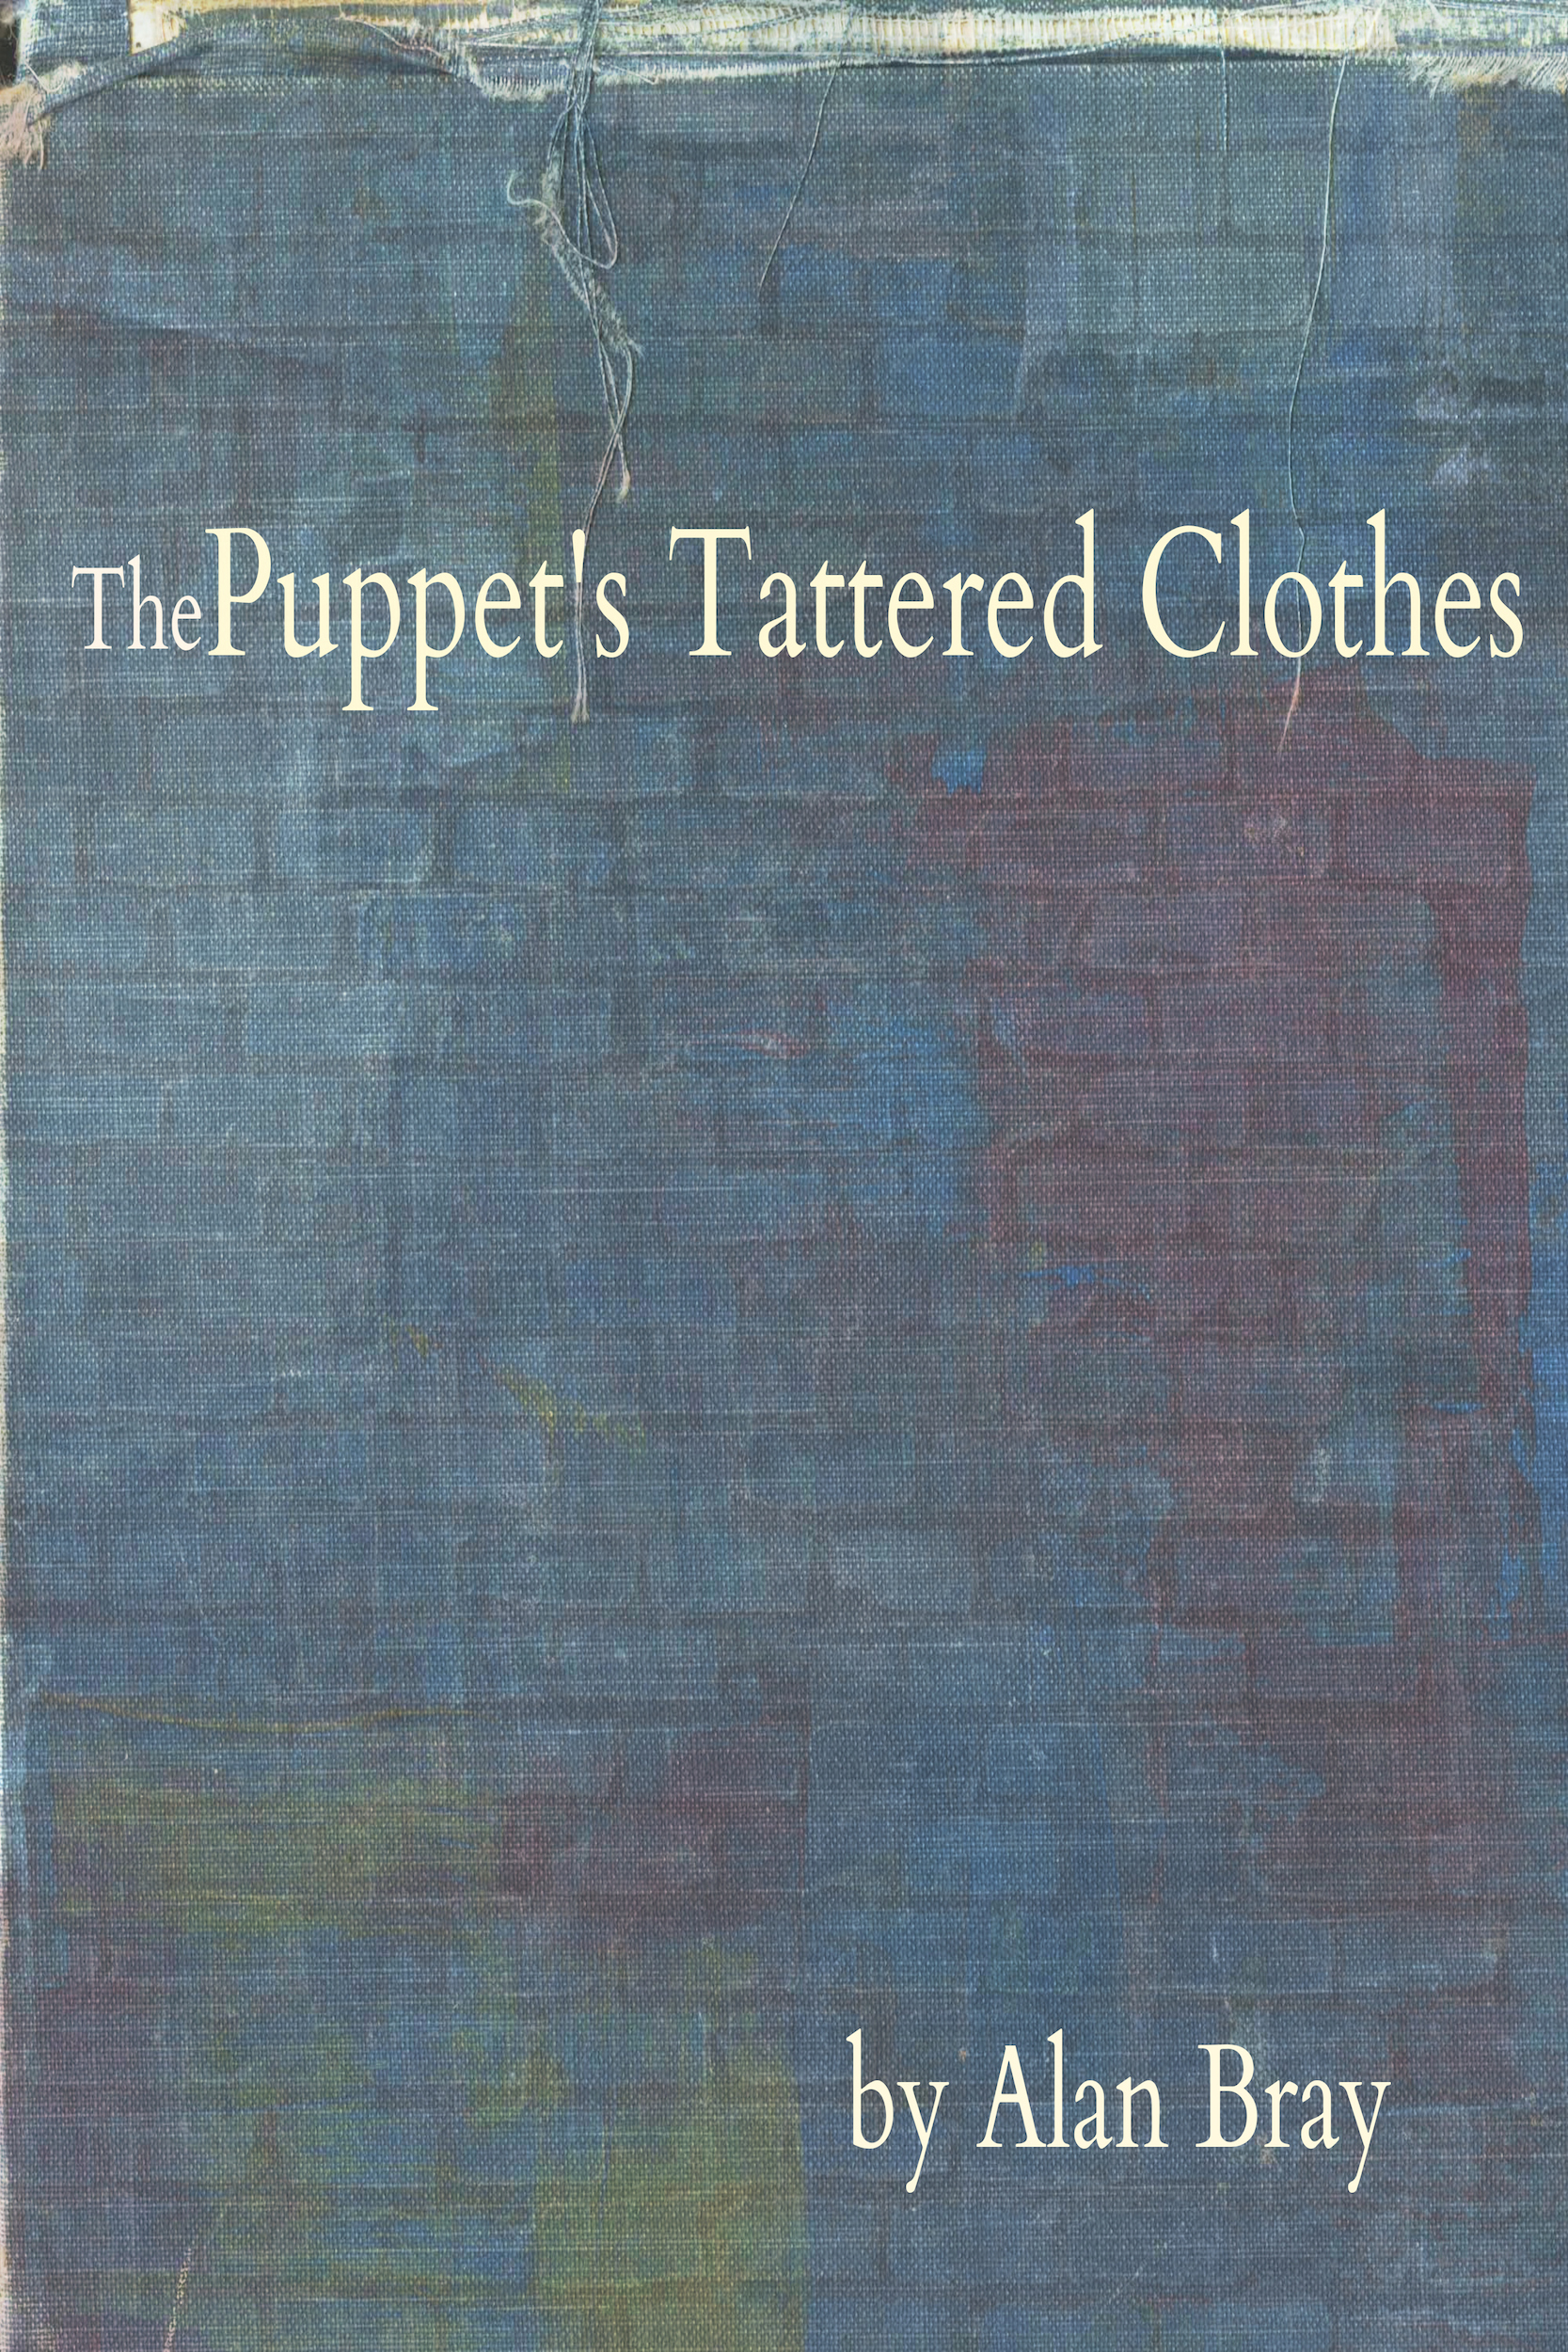 The Puppet's Tattered Clothes by Alan Bray, a flash novel from Bartleby Snopes Press